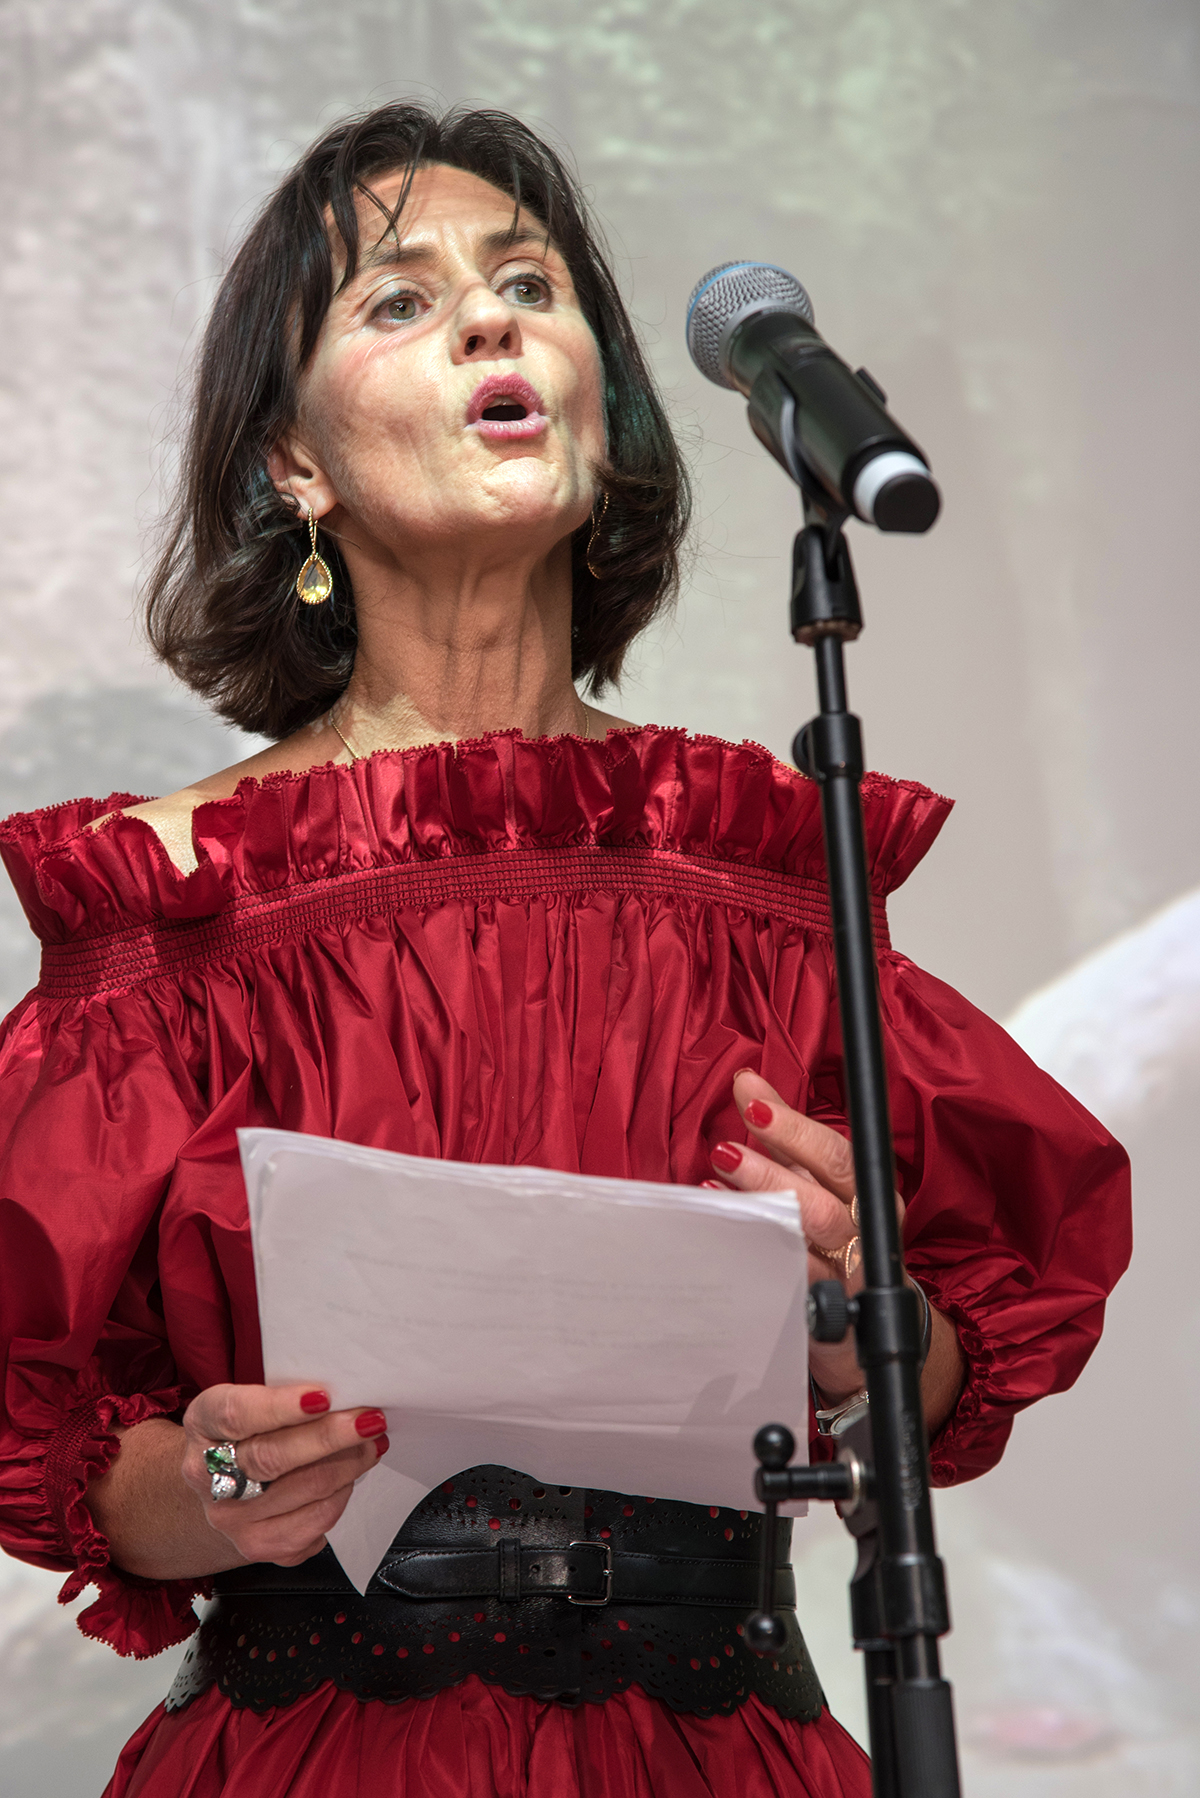 A woman with short black hair wearing a red puffy off the shoulder dress giving a speech